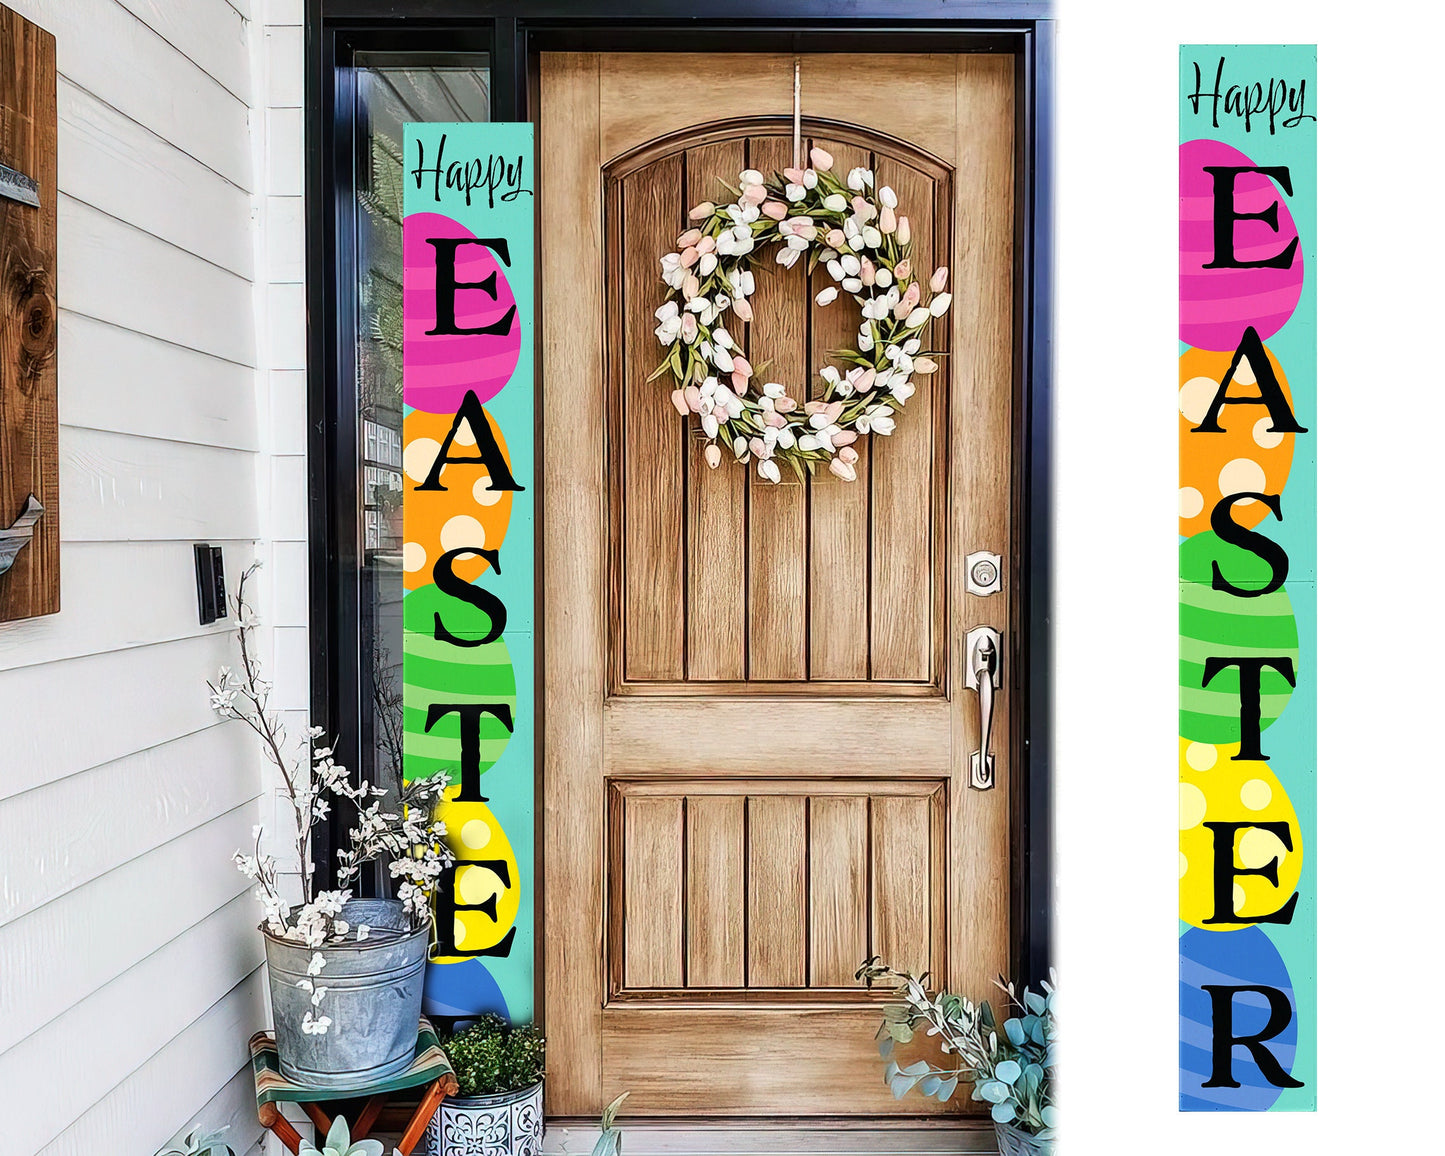 72in Happy Easter Porch Sign - Easter Decor Sign, Home Front Door Yard Party Decor, Folding Sign, Turquoise, Farmhouse Party Decor